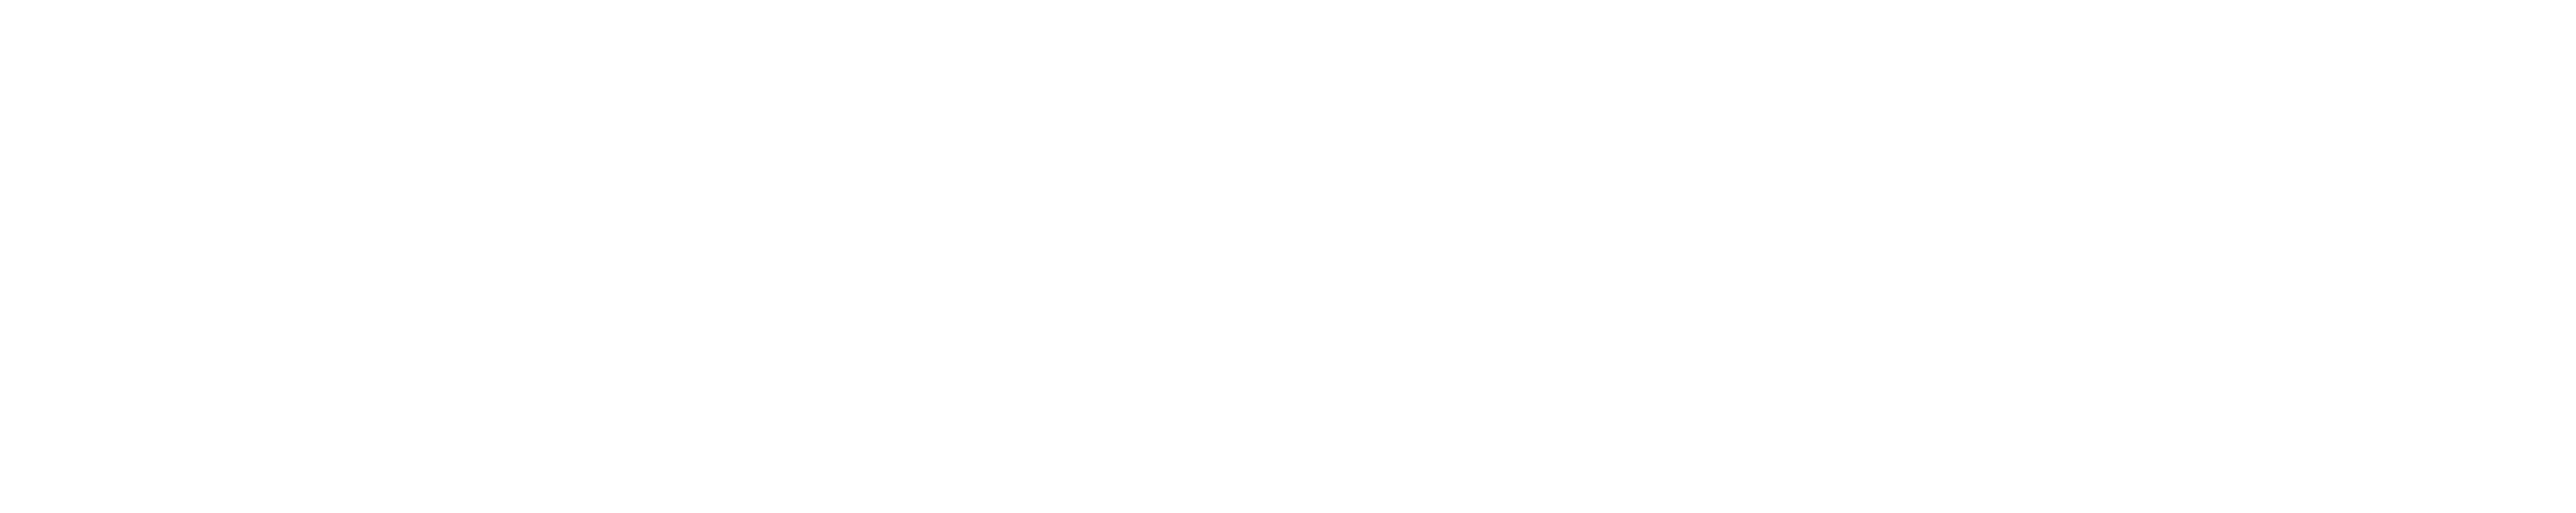 The Sims Resource logo